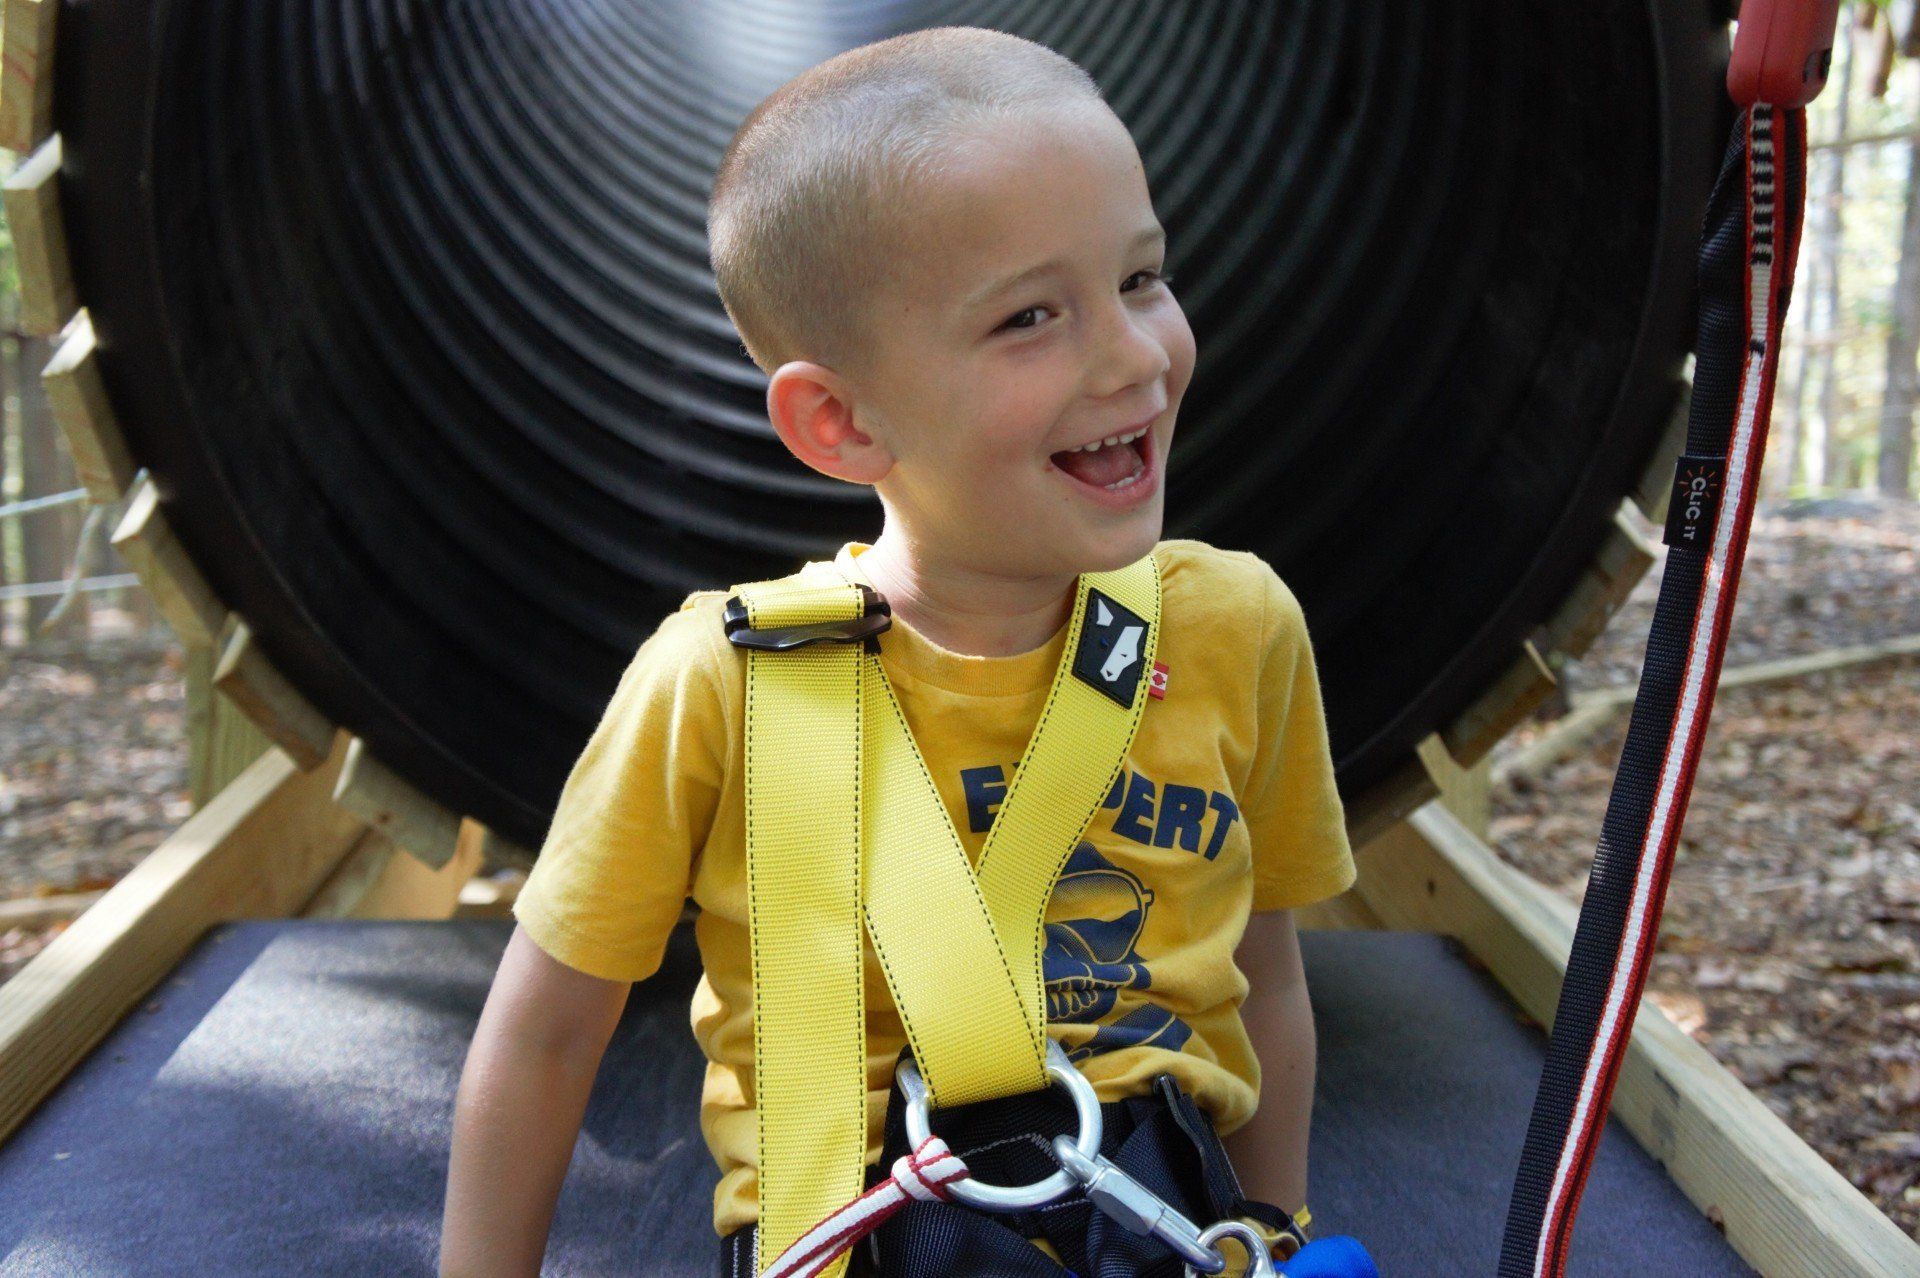 Young boy smiling after going down a slide